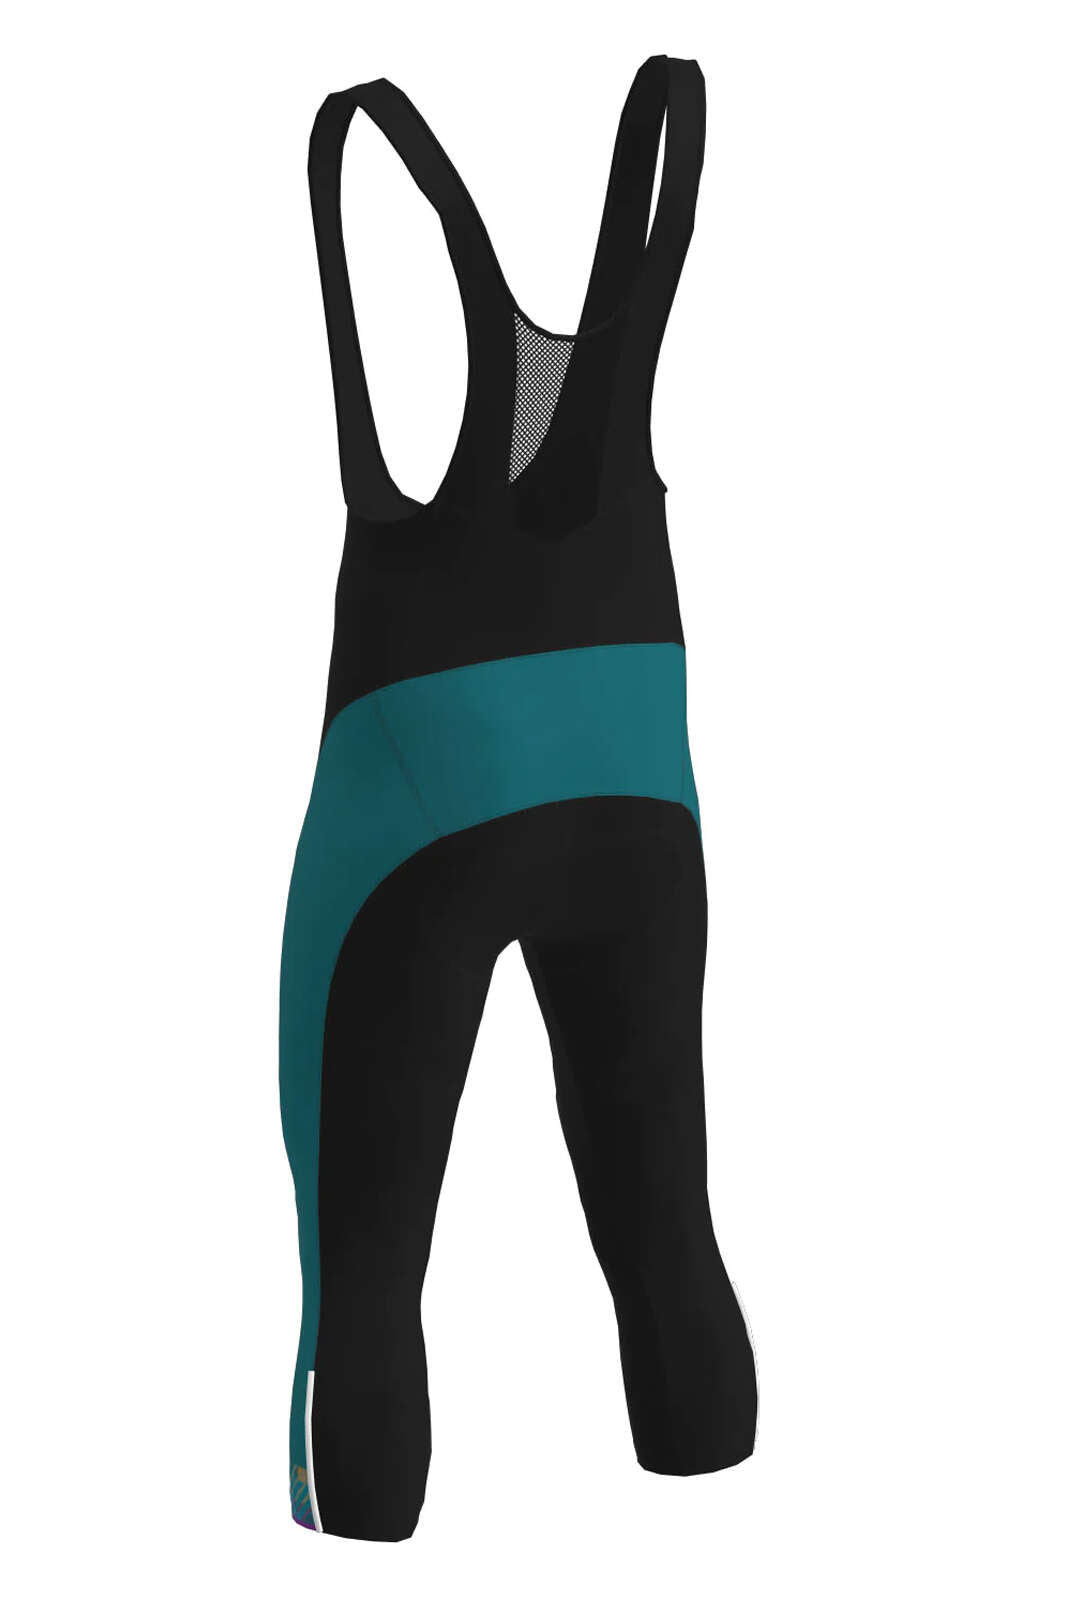 Men's Custom Thermal 3/4 Bib Tights - Ouray Back View